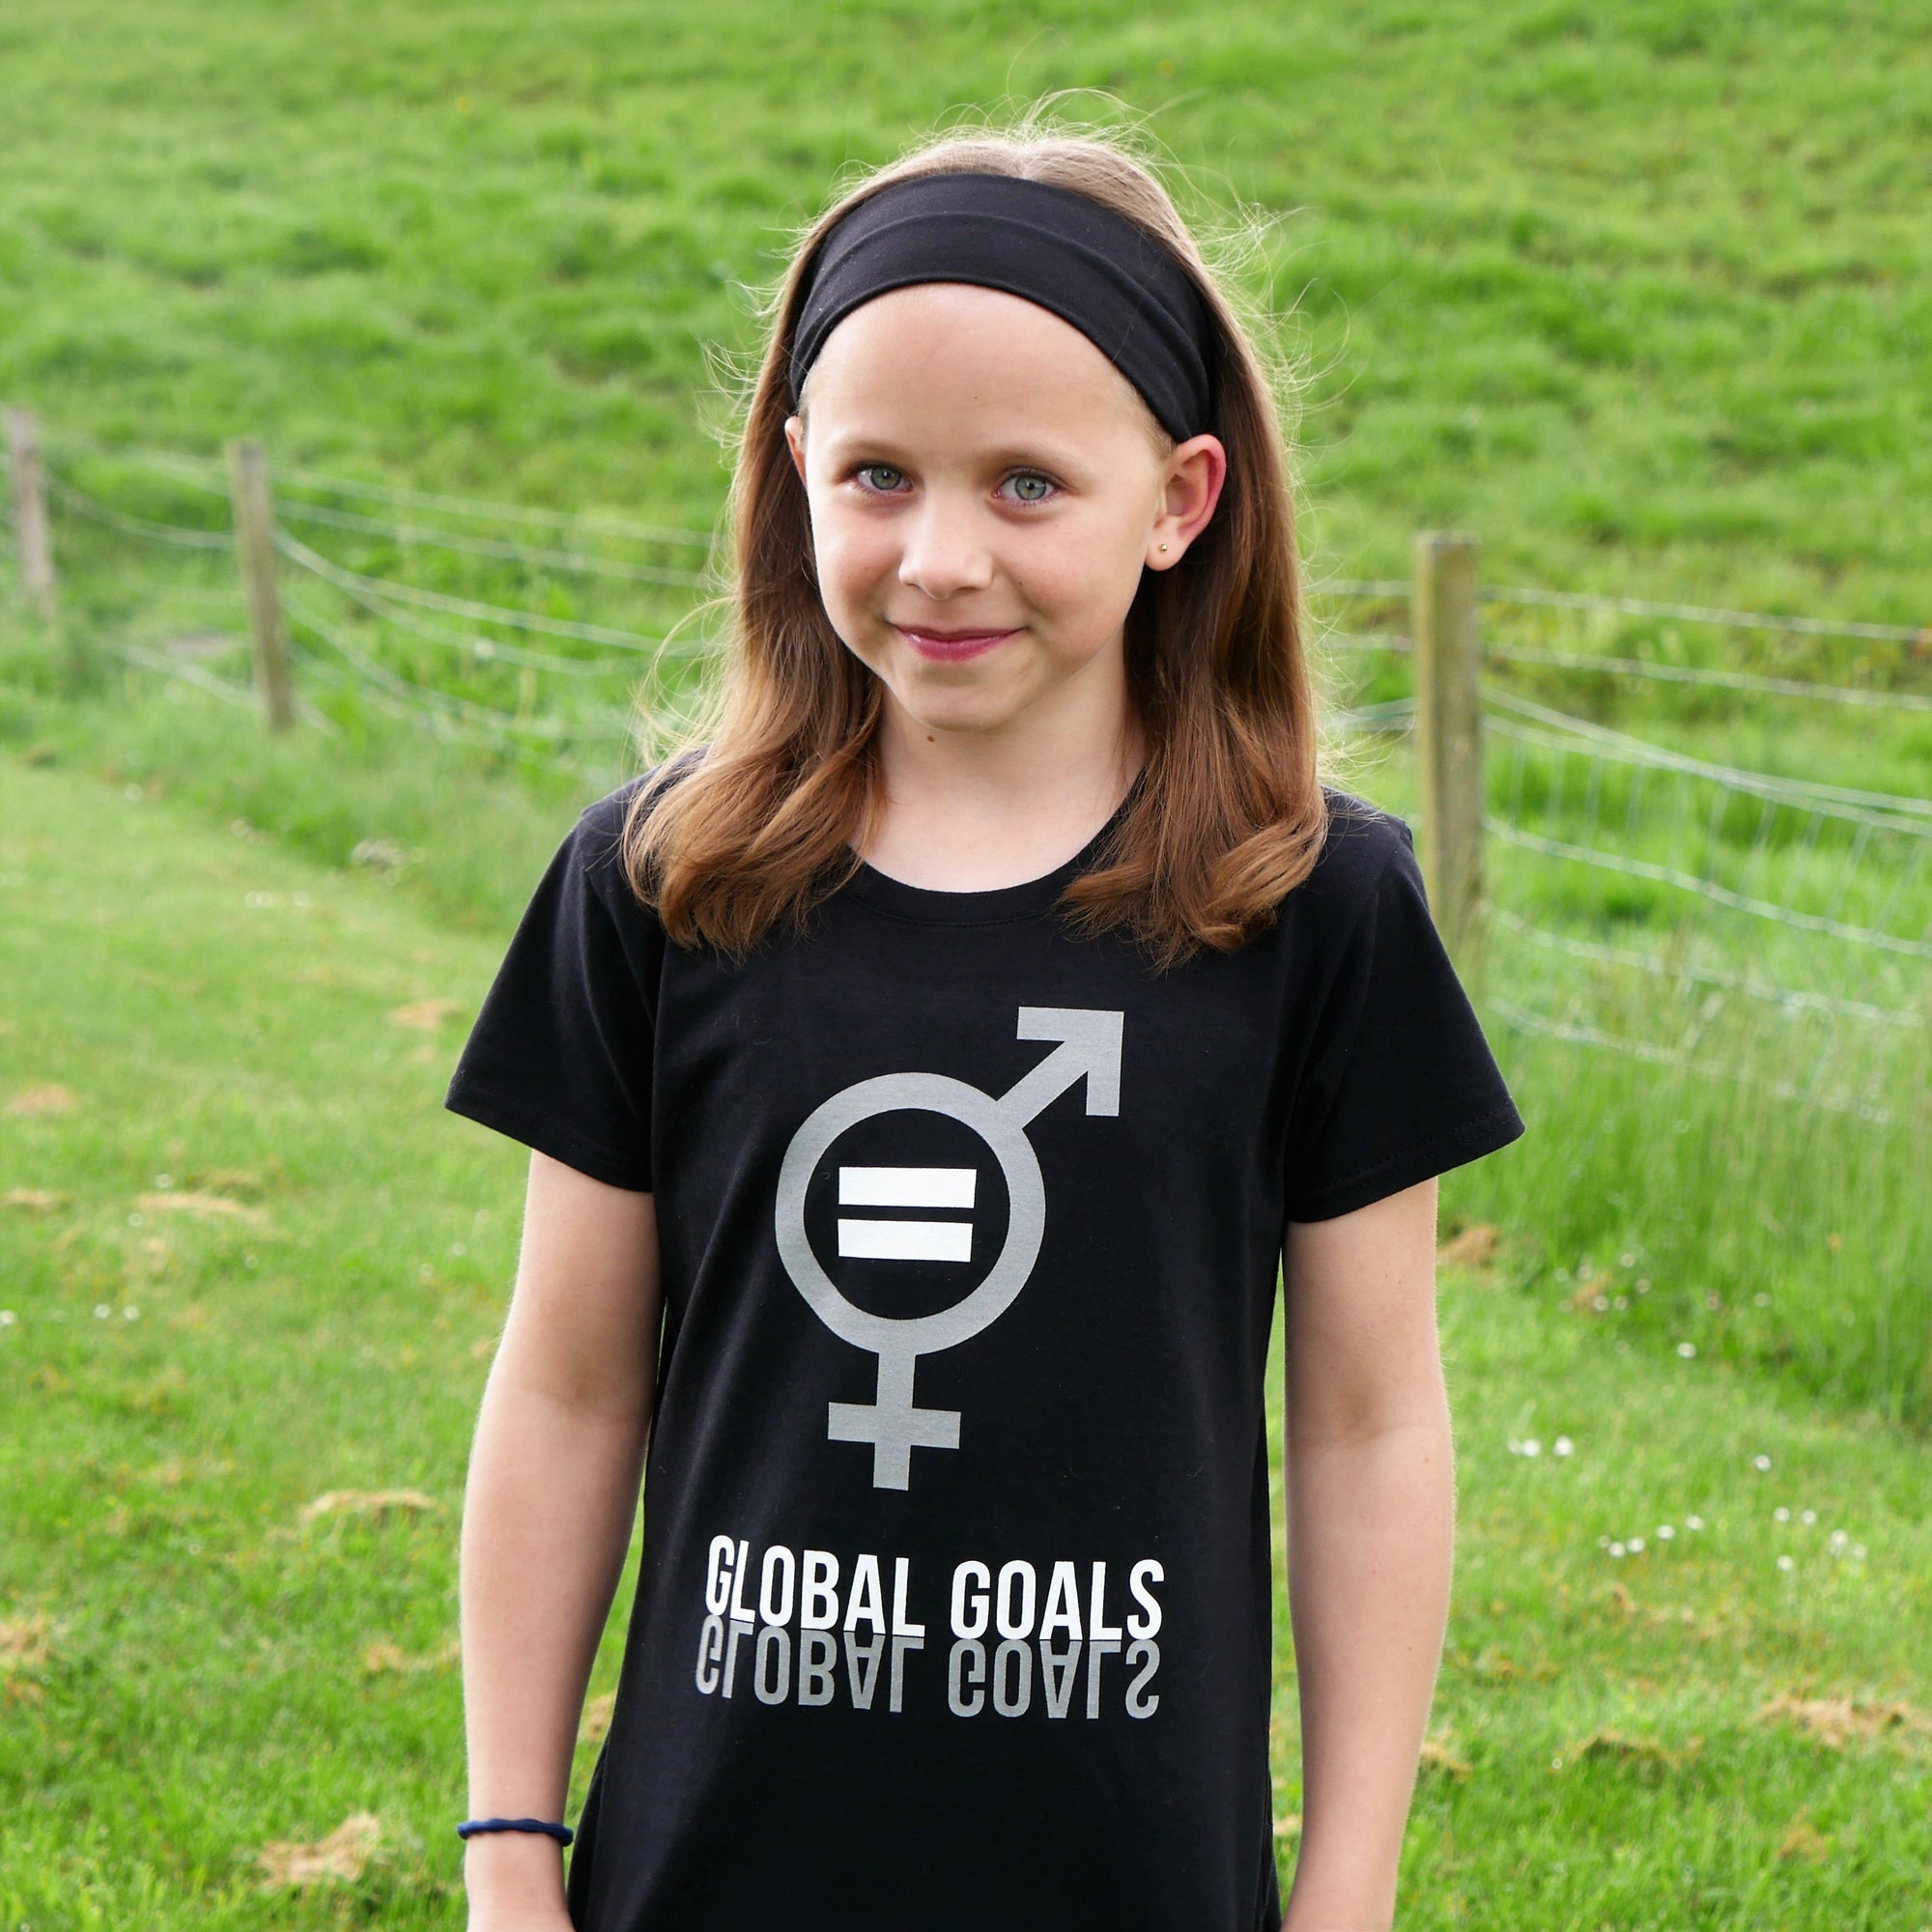 Global Goals 'Gender Equality' Greyscale T-Shirt for Teens/Adults - Scarf Monkey